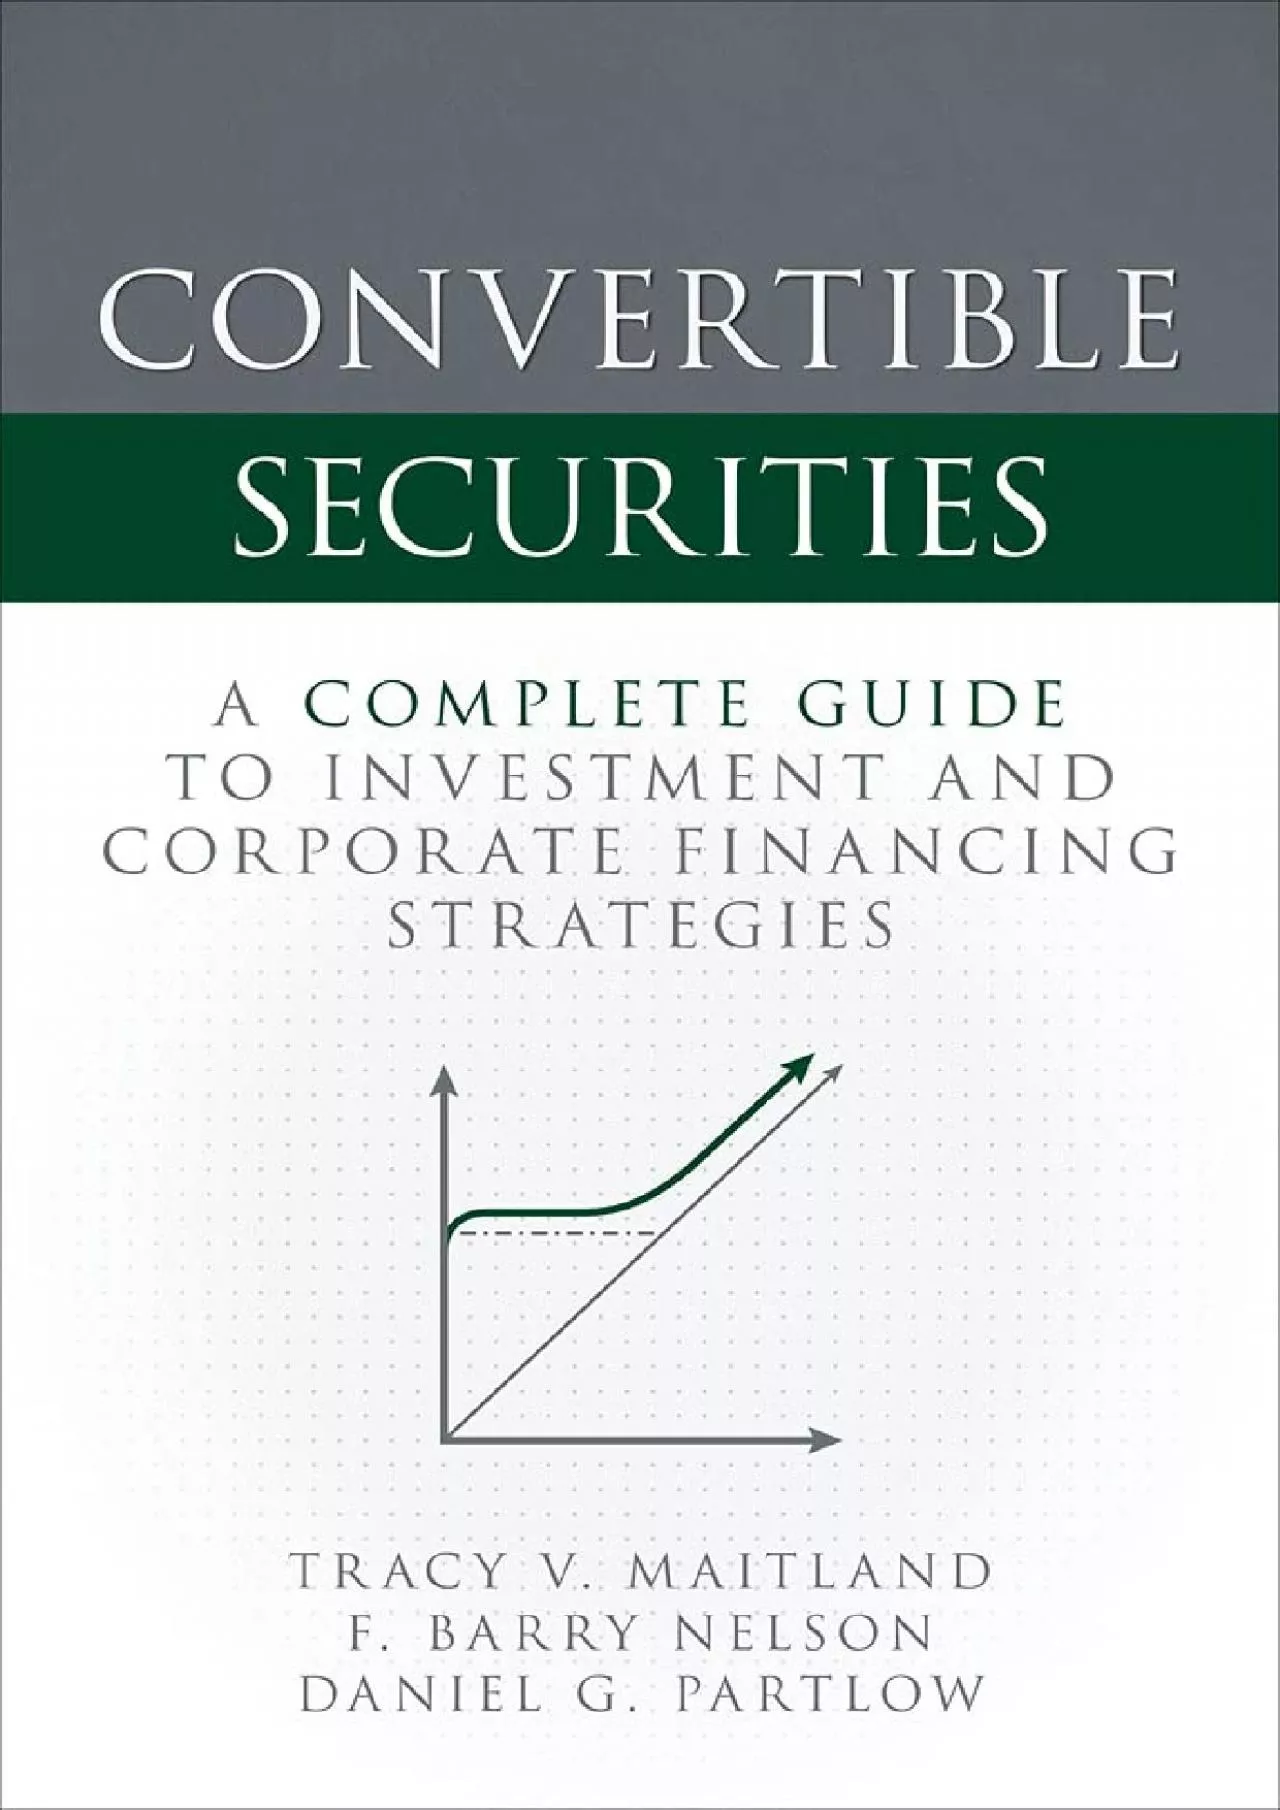 Convertible Securities: A Complete Guide to Investment and Corporate Financing Strategies